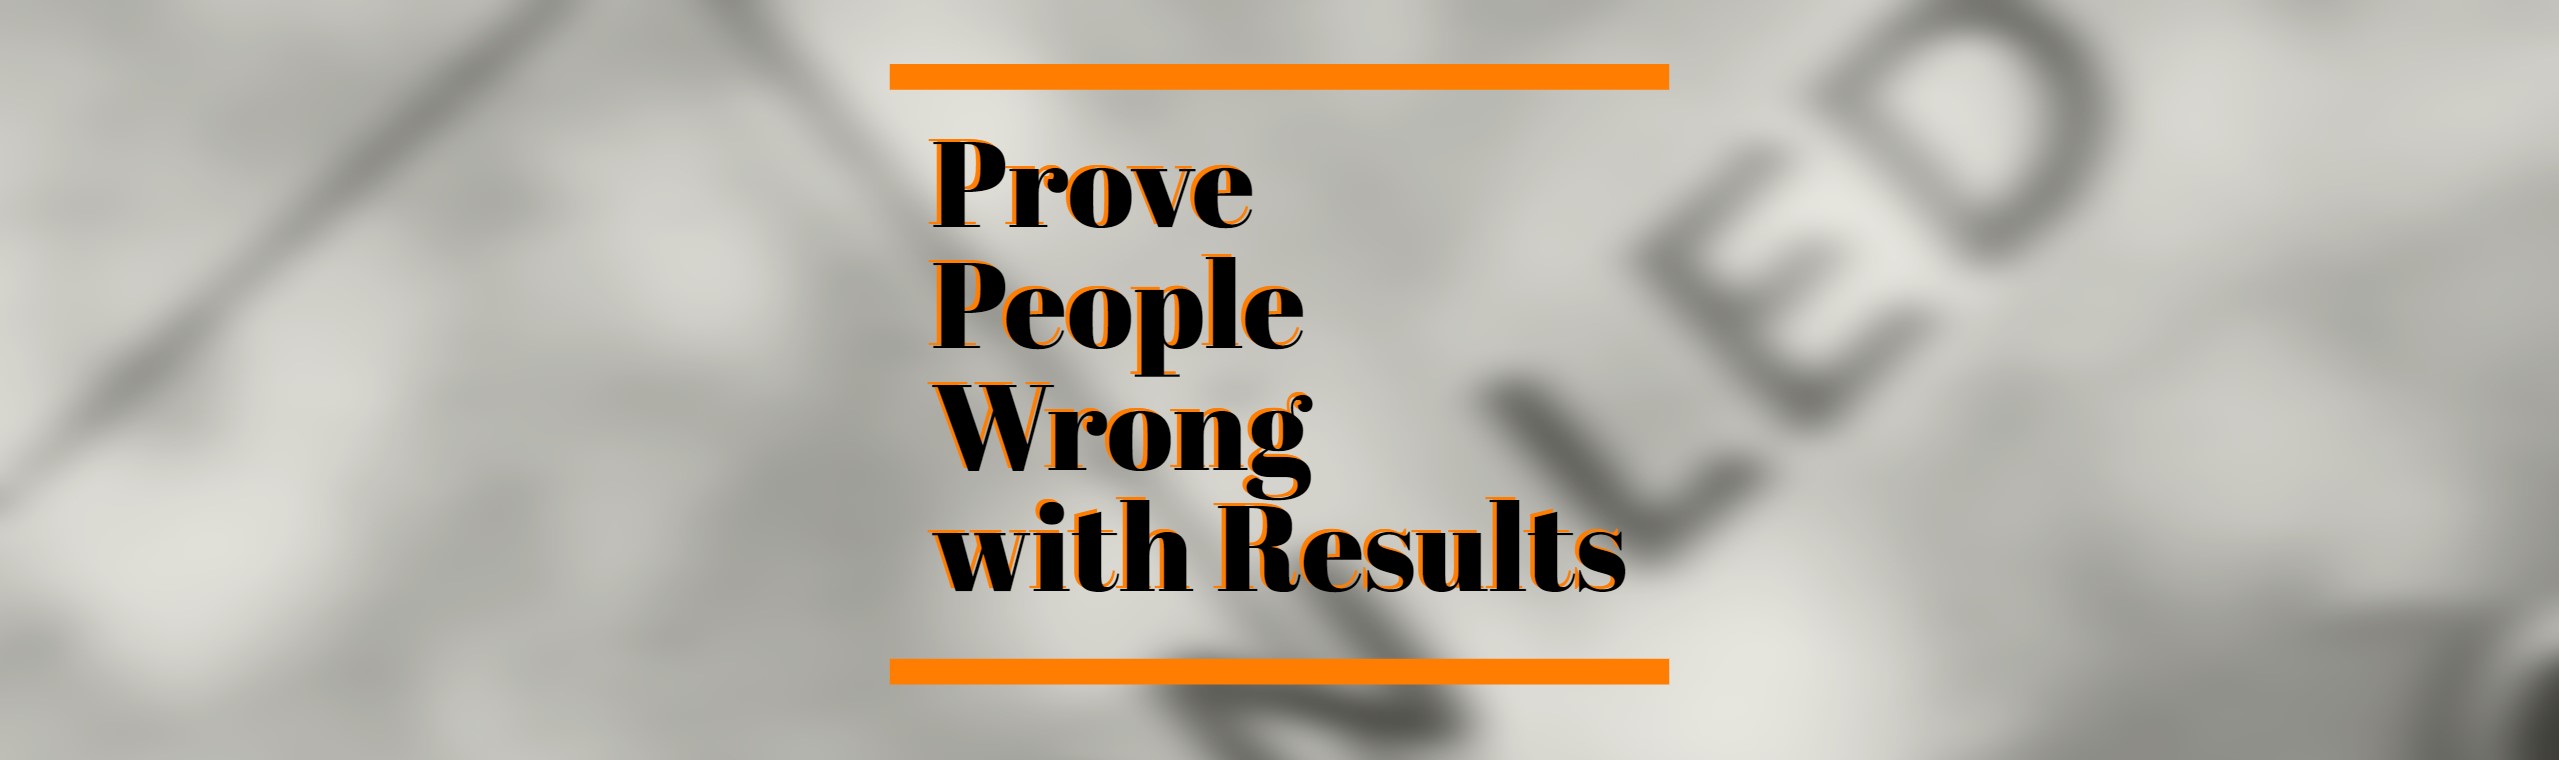 prove people wrong with results